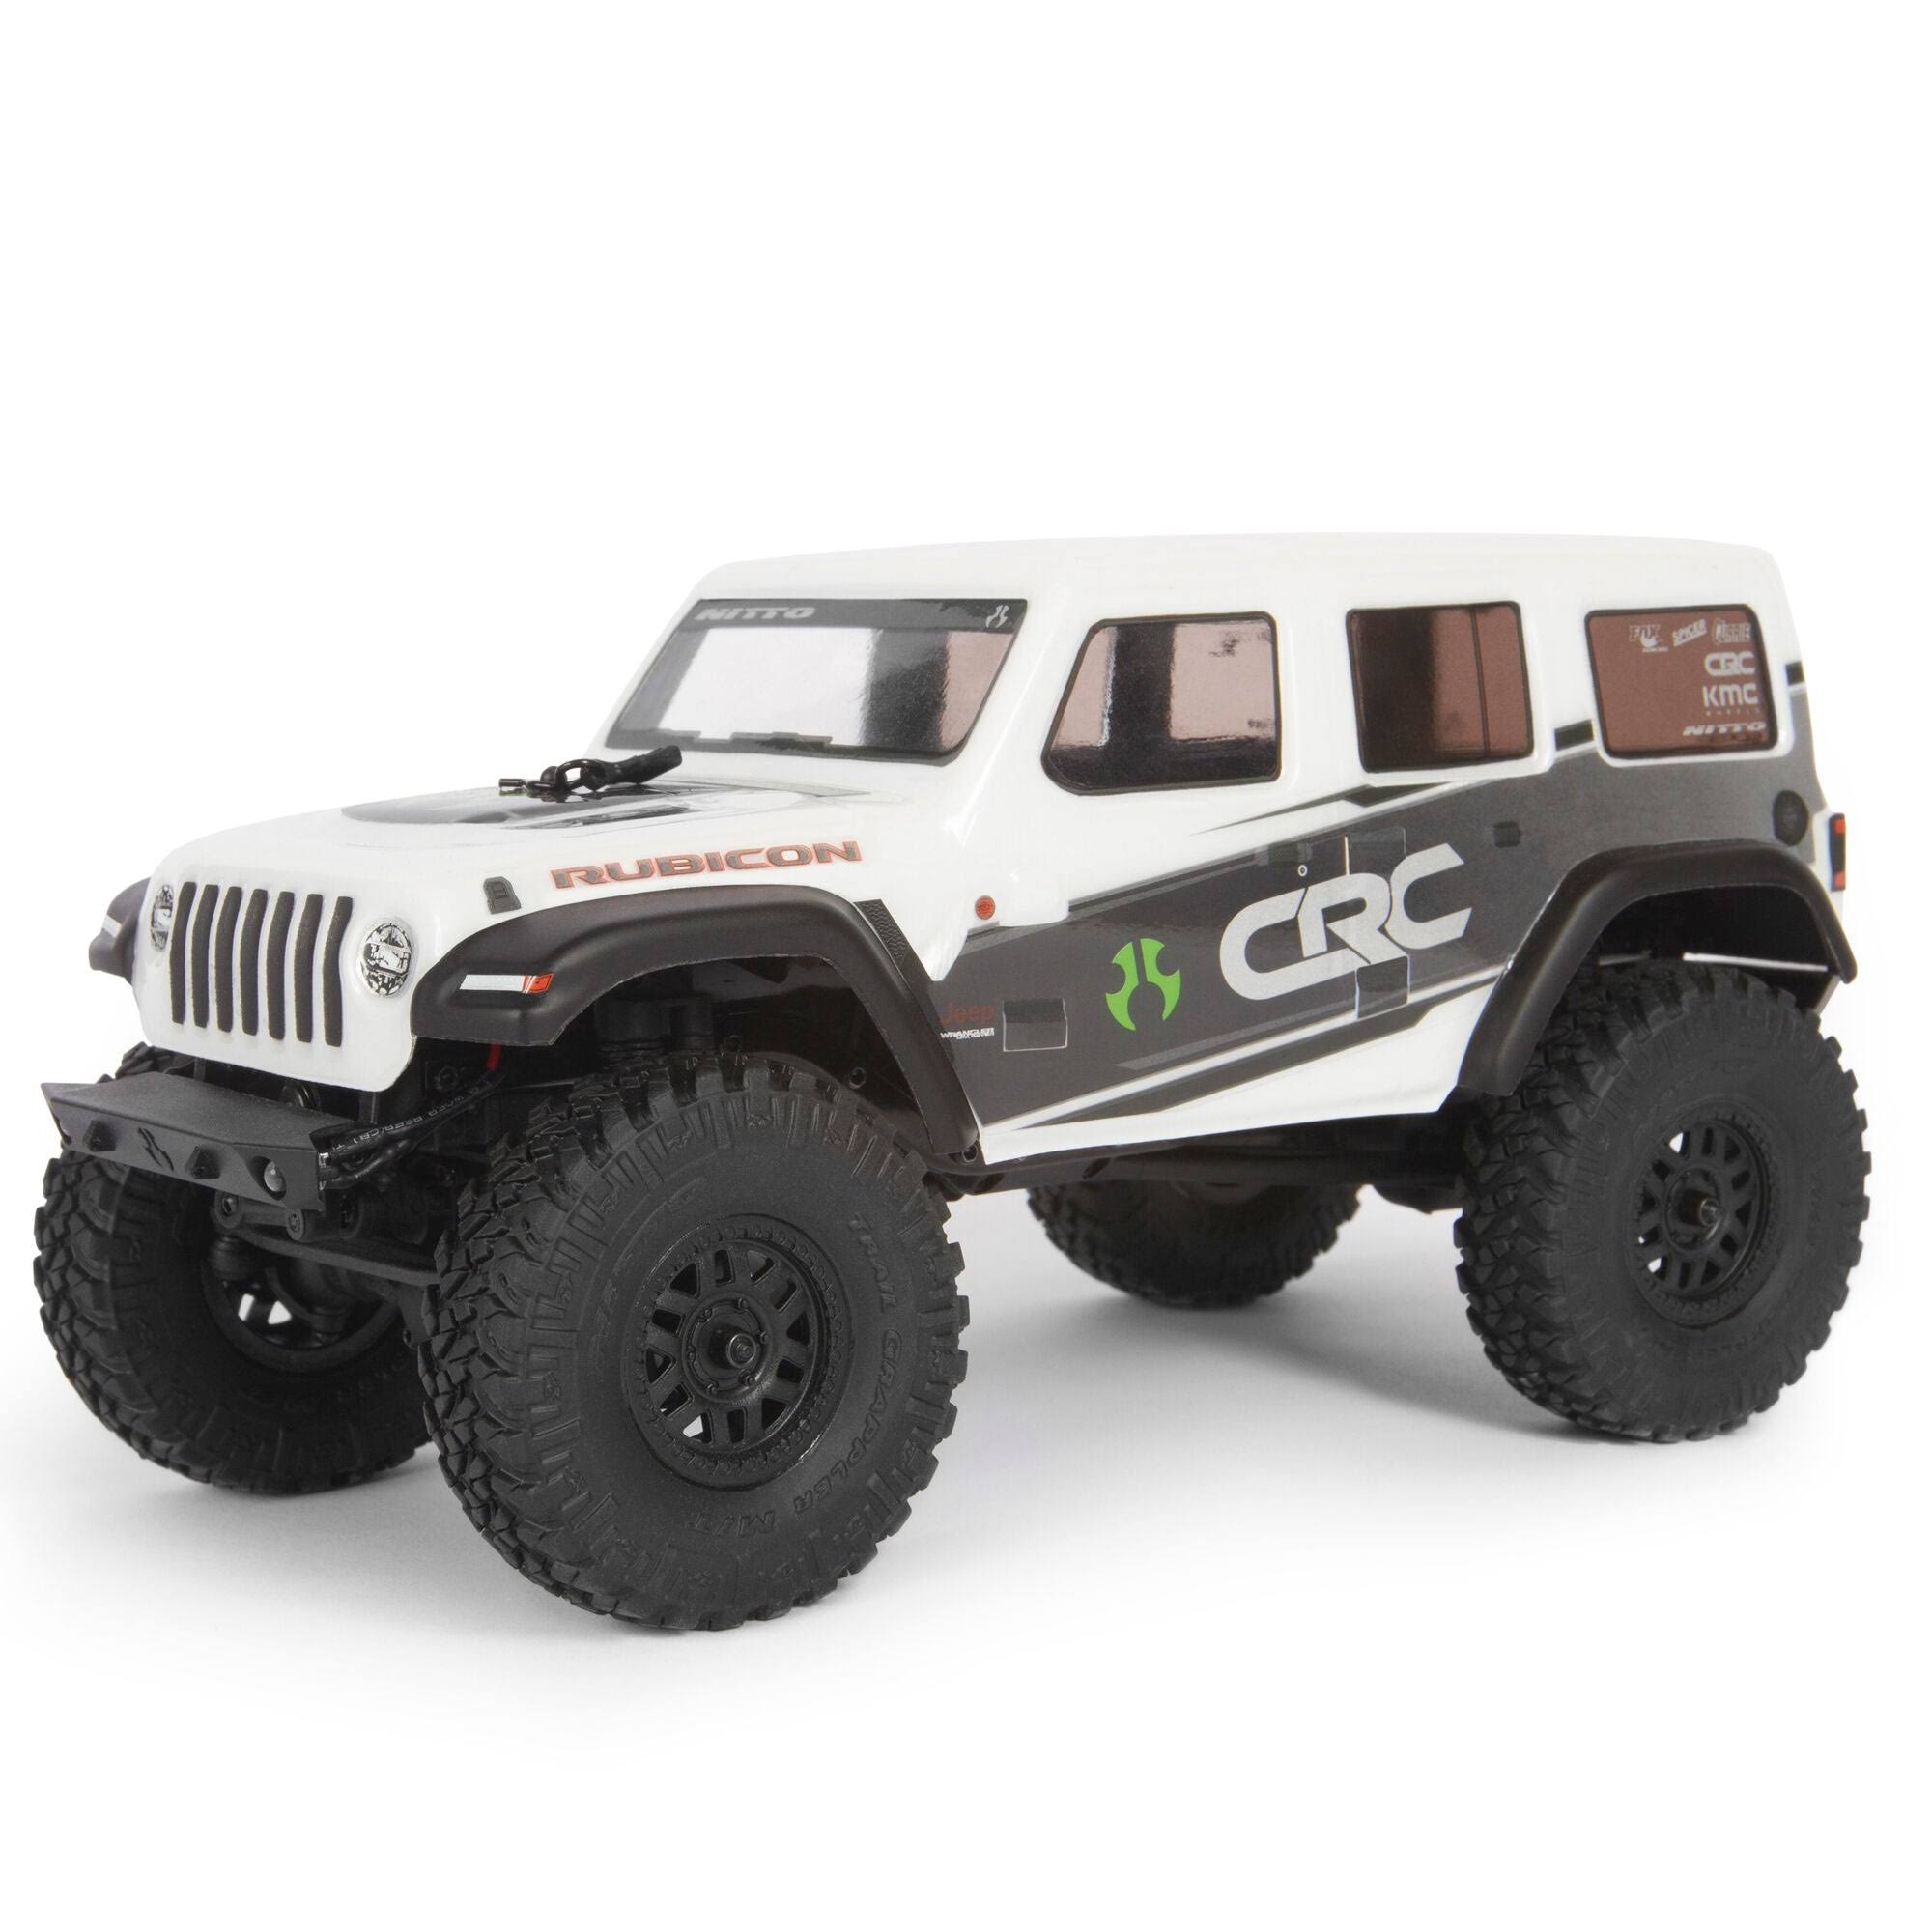 Axial AXI00002T1 Jeep Wrangler 4WD RC Model Kit - White, Scale 1:24